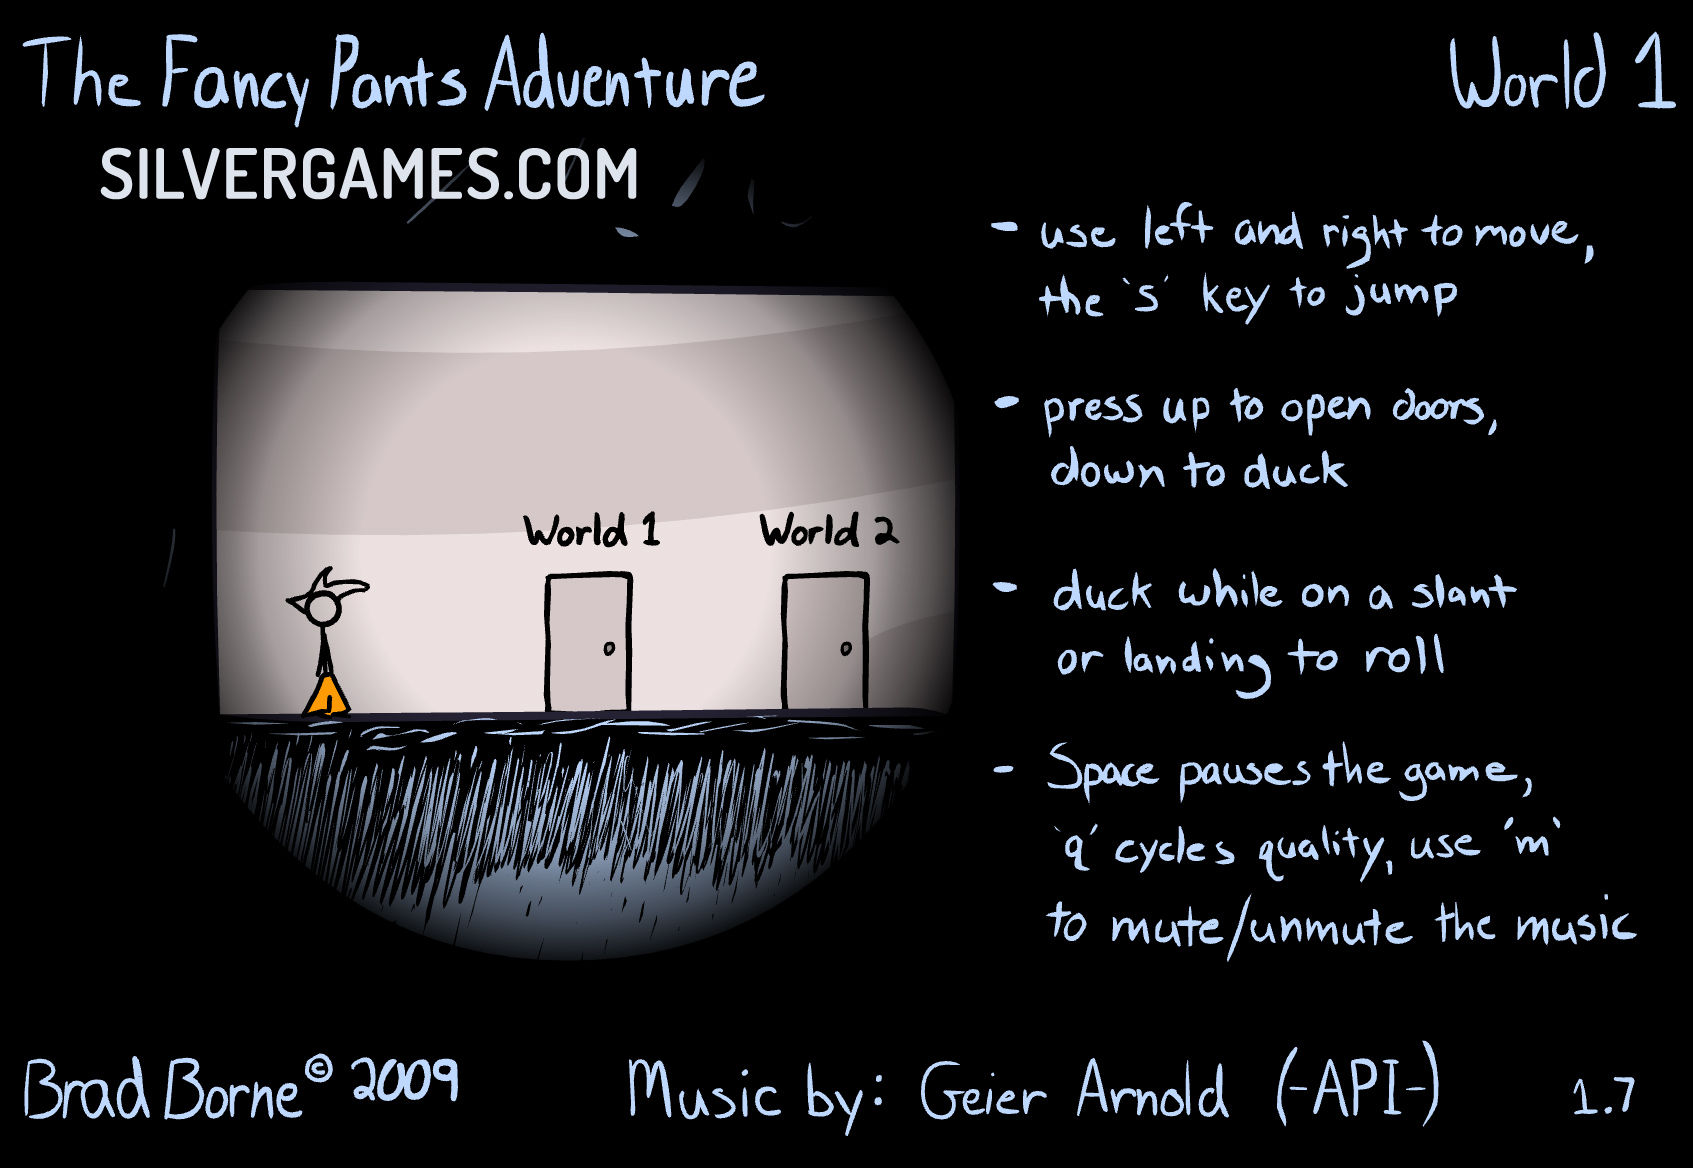 THE FANCY PANTS ADVENTURE 2 free online game on Miniplay.com